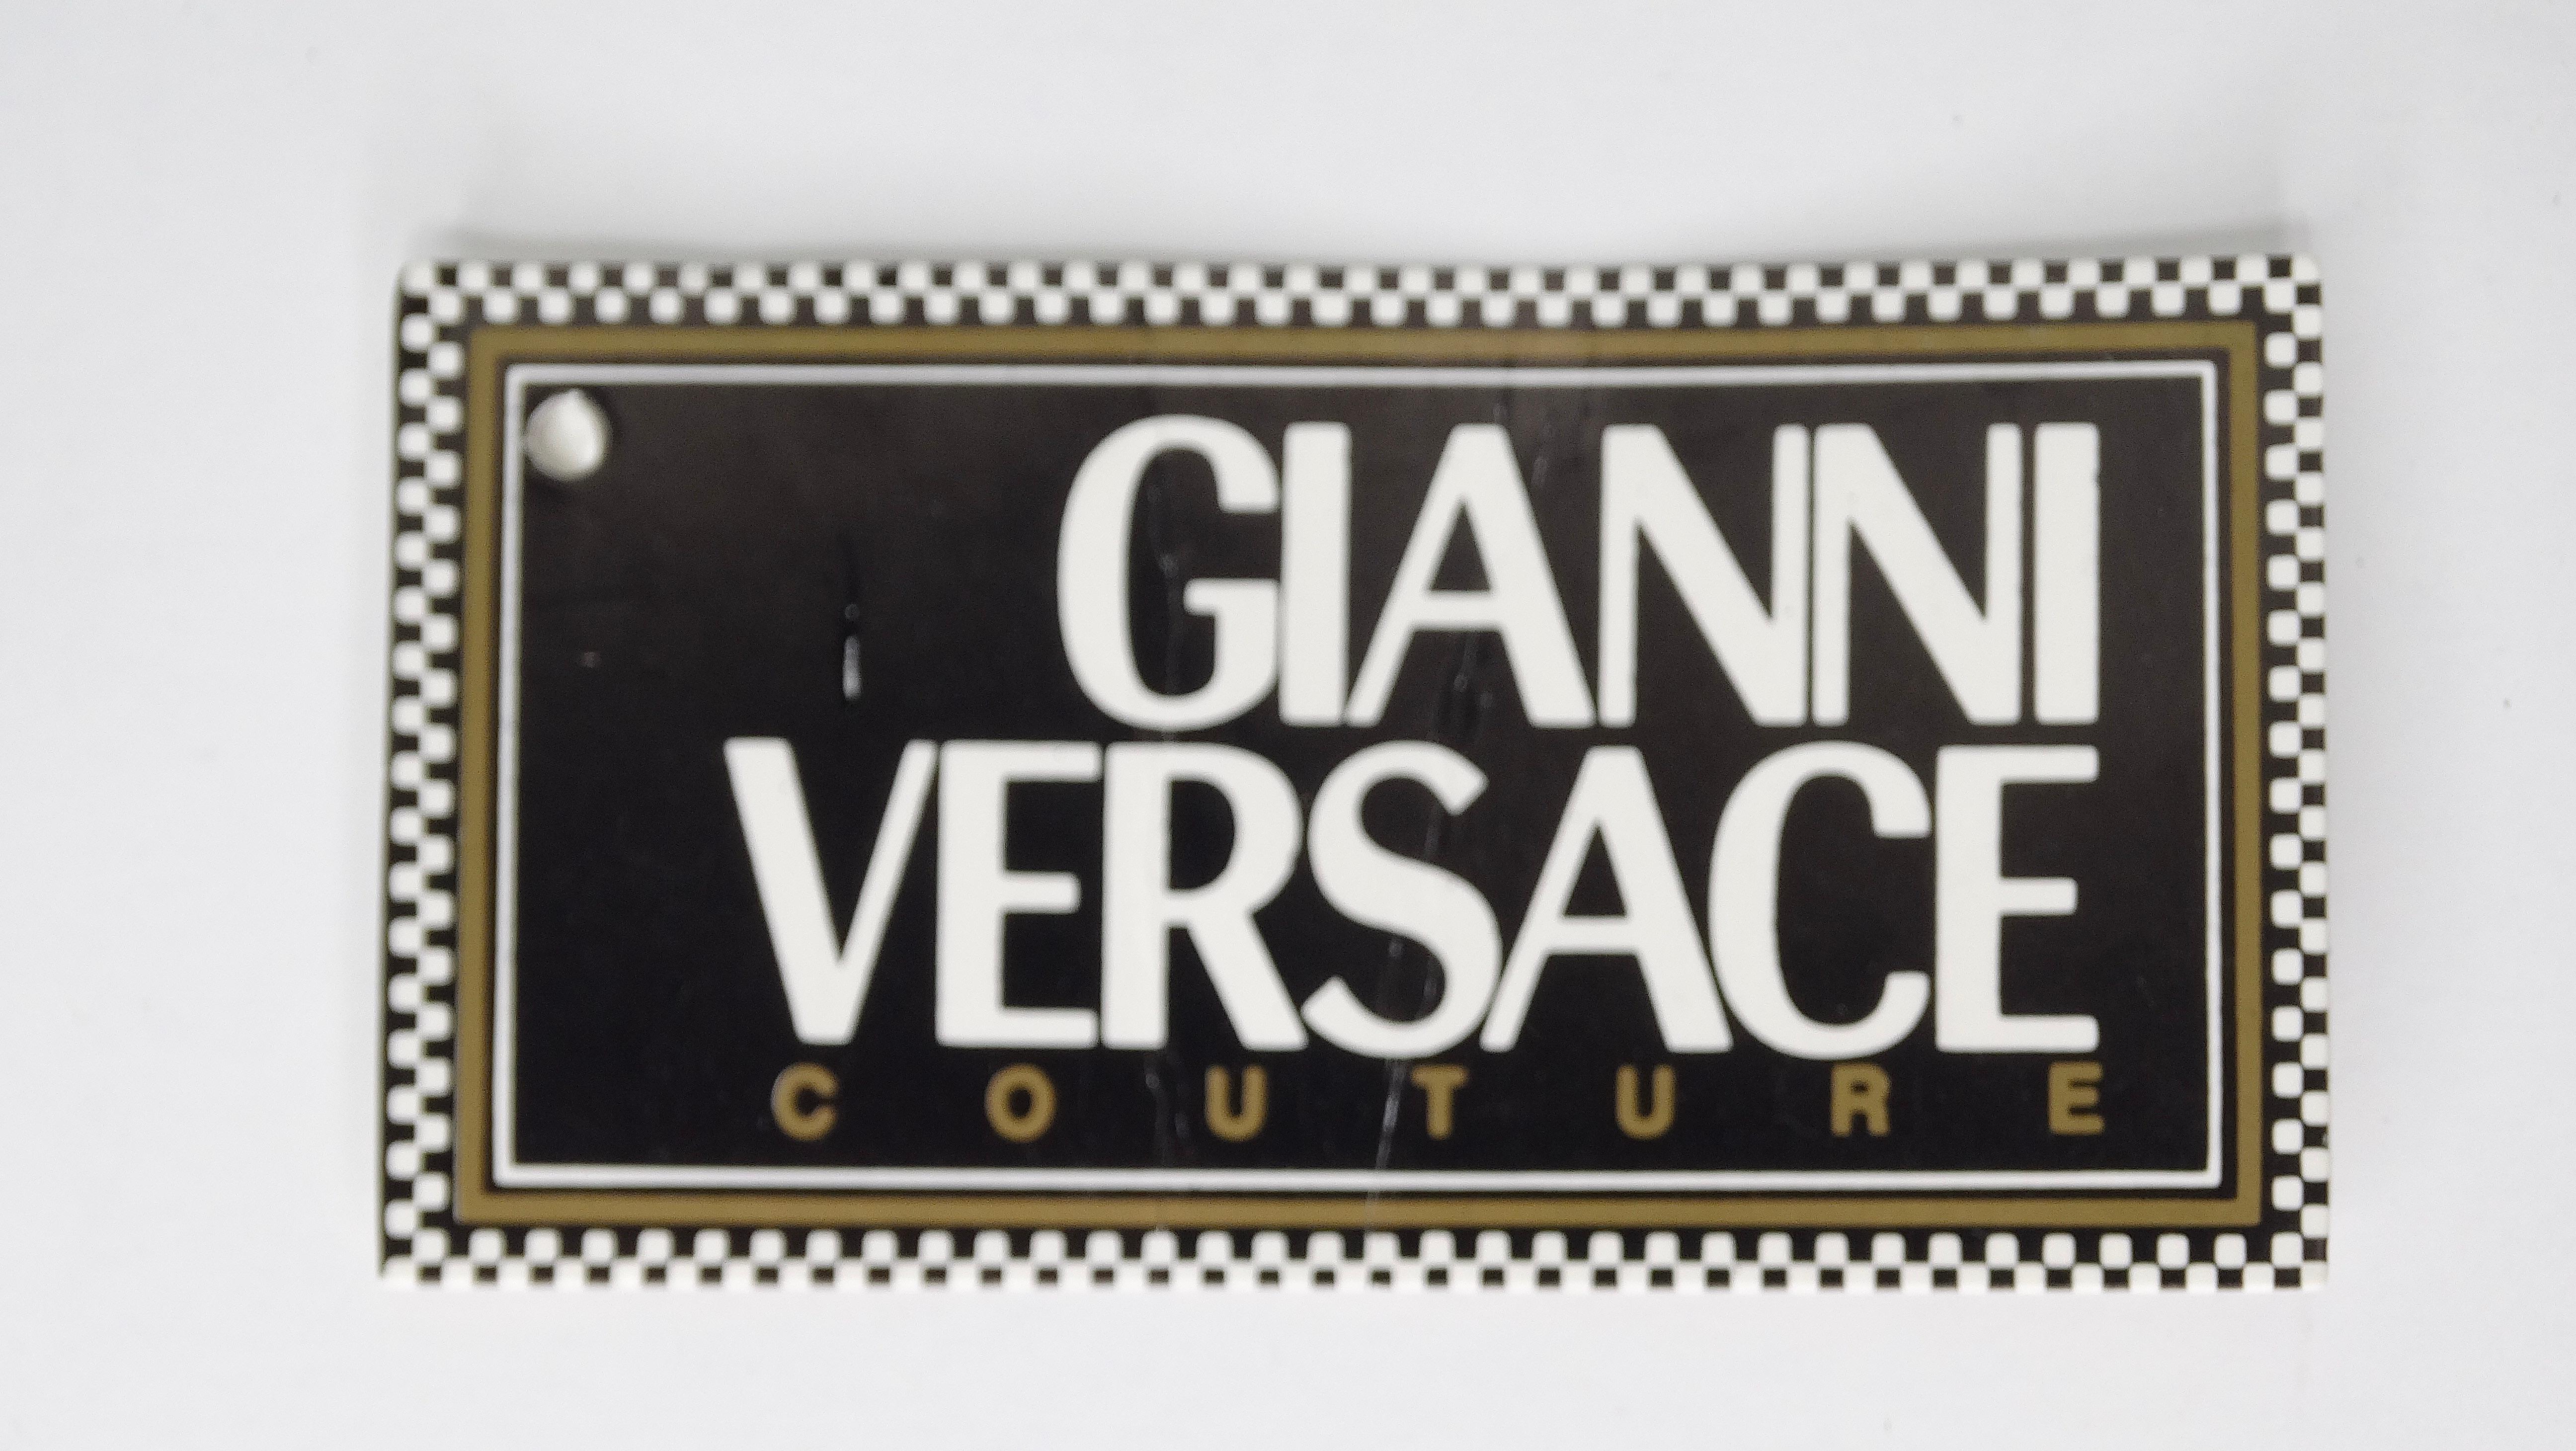 Gianni Versace Couture 1997 Absolut Vodka Bag  For Sale 7